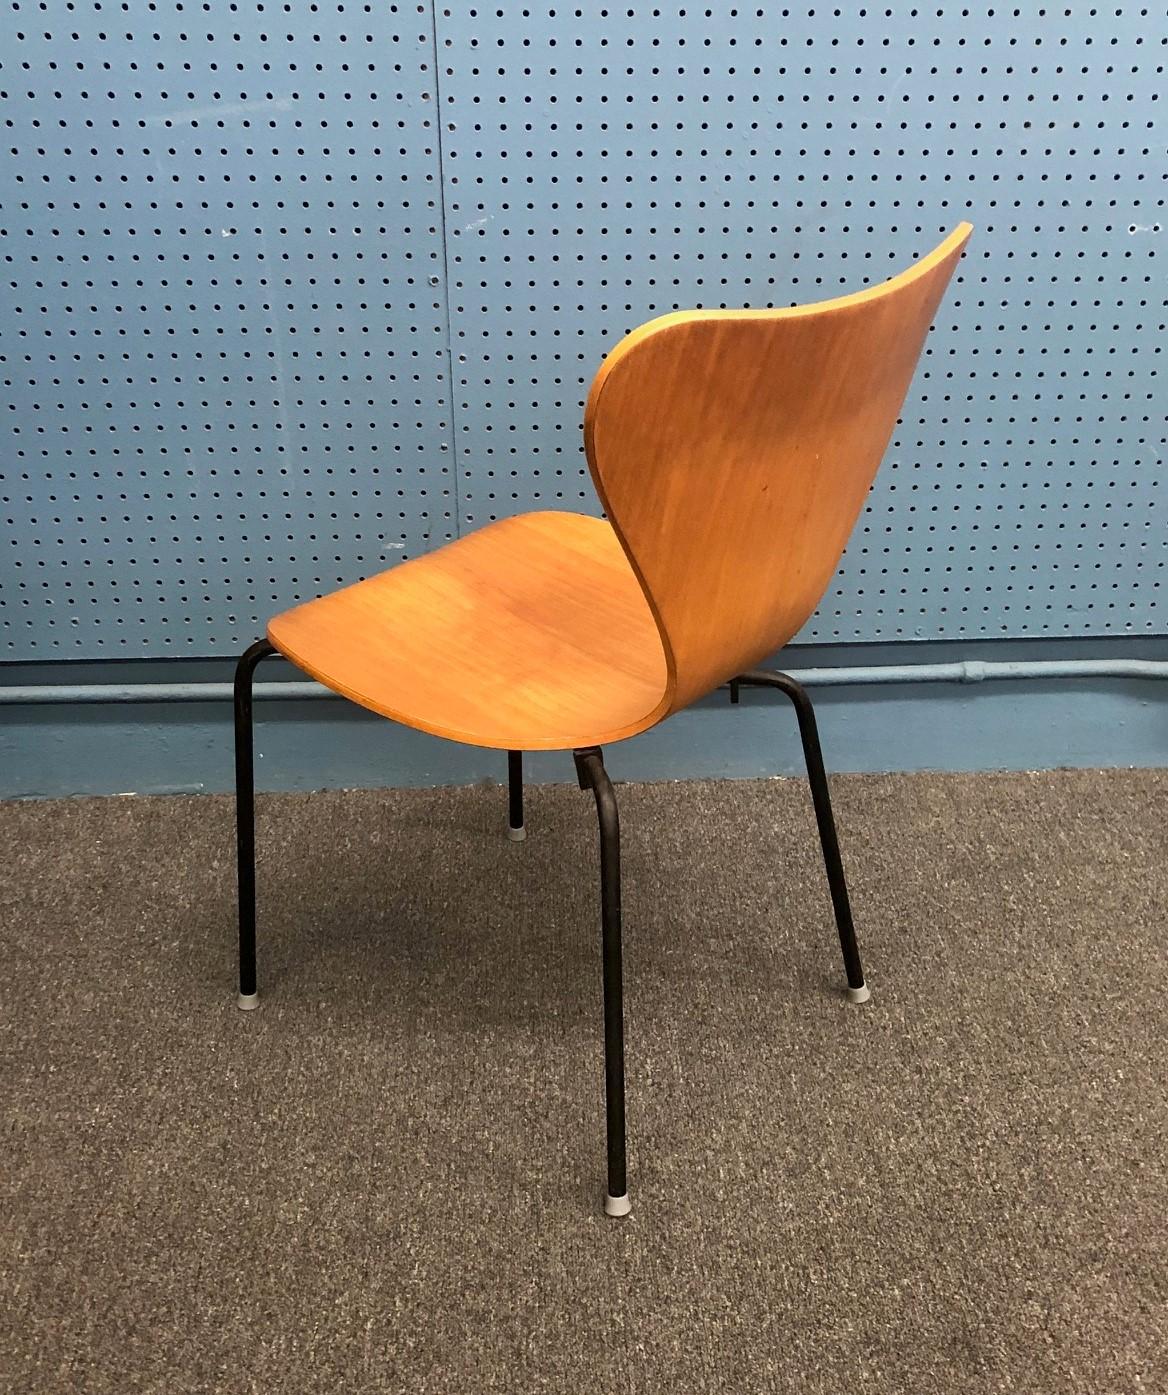 Danish Modern Chair in Teak by Herbert Hirche for Jofa Stalmobler In Good Condition For Sale In San Diego, CA